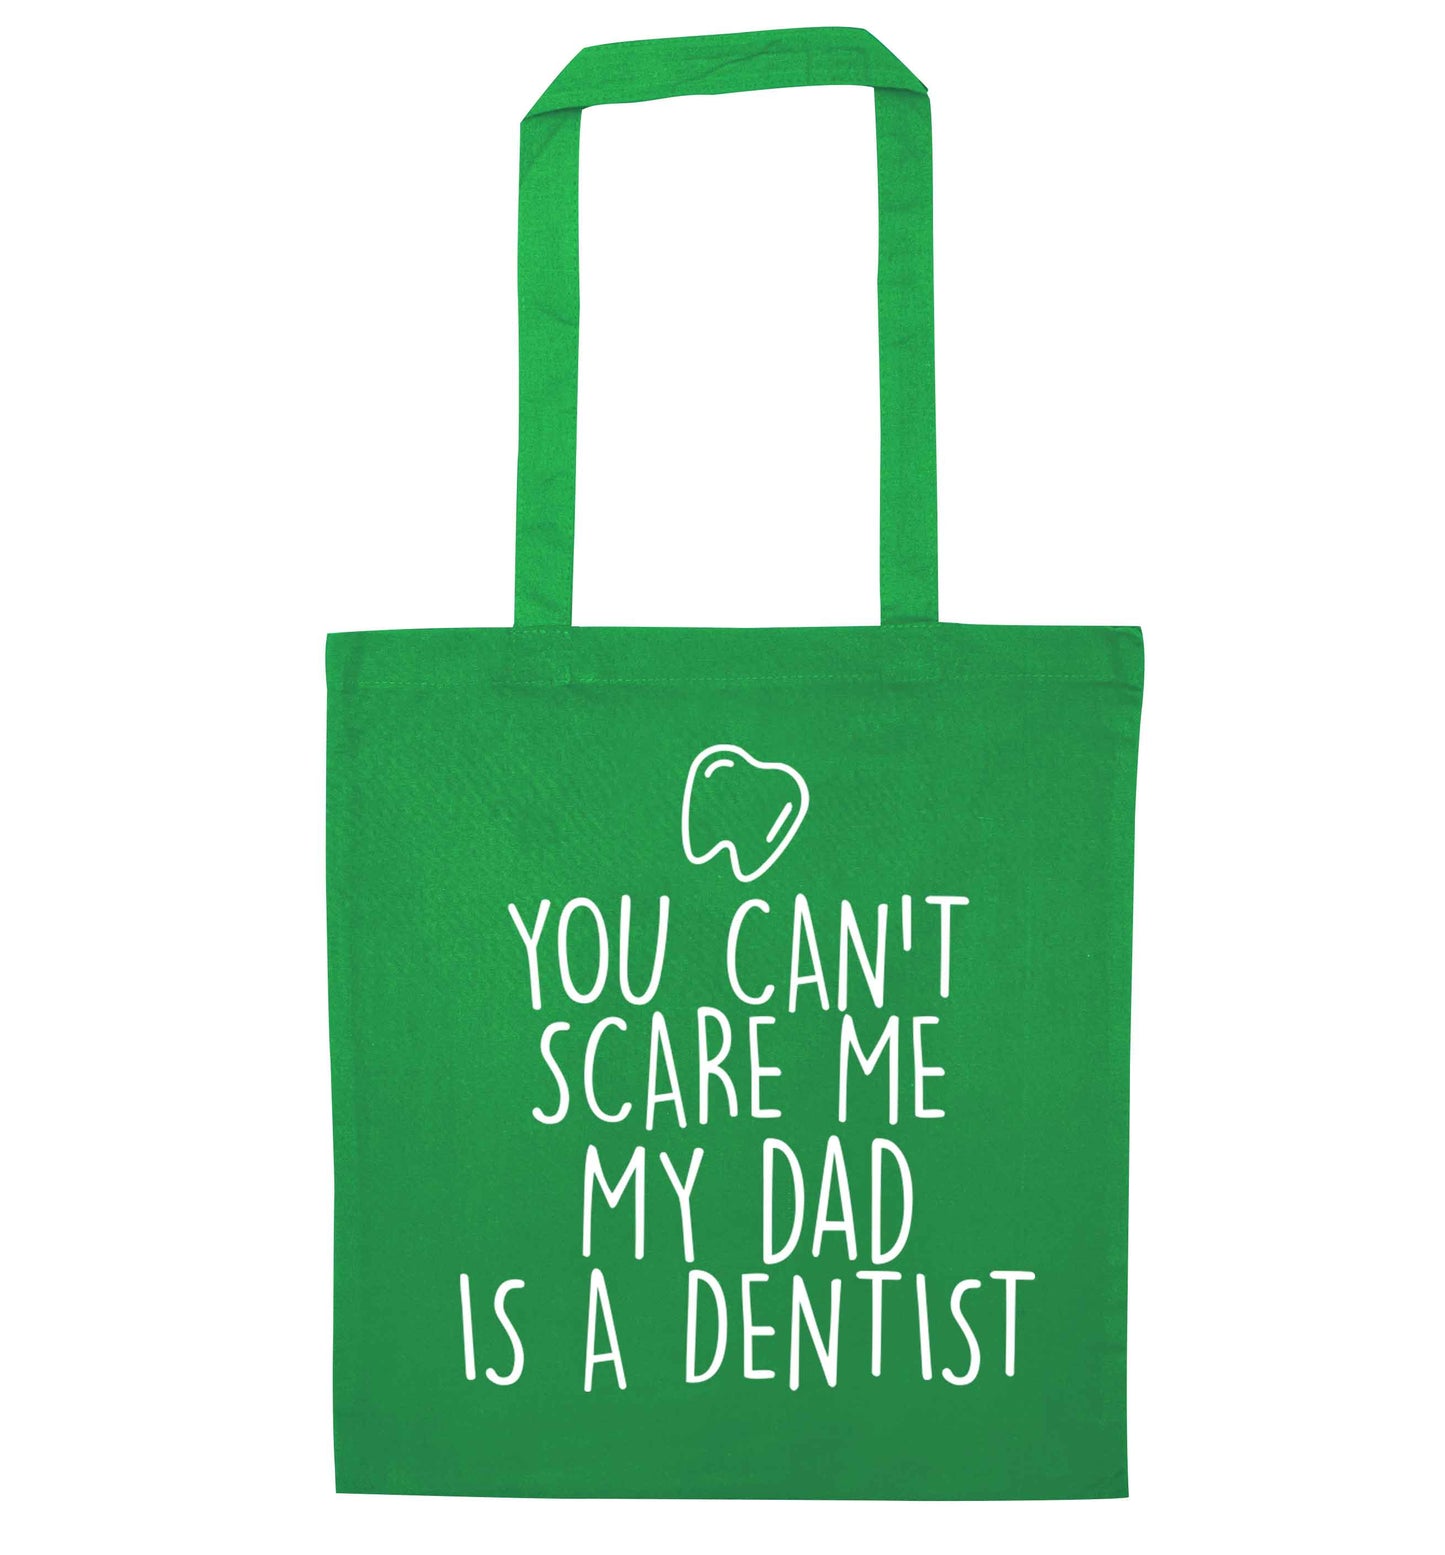 You can't scare me my dad is a dentist green tote bag